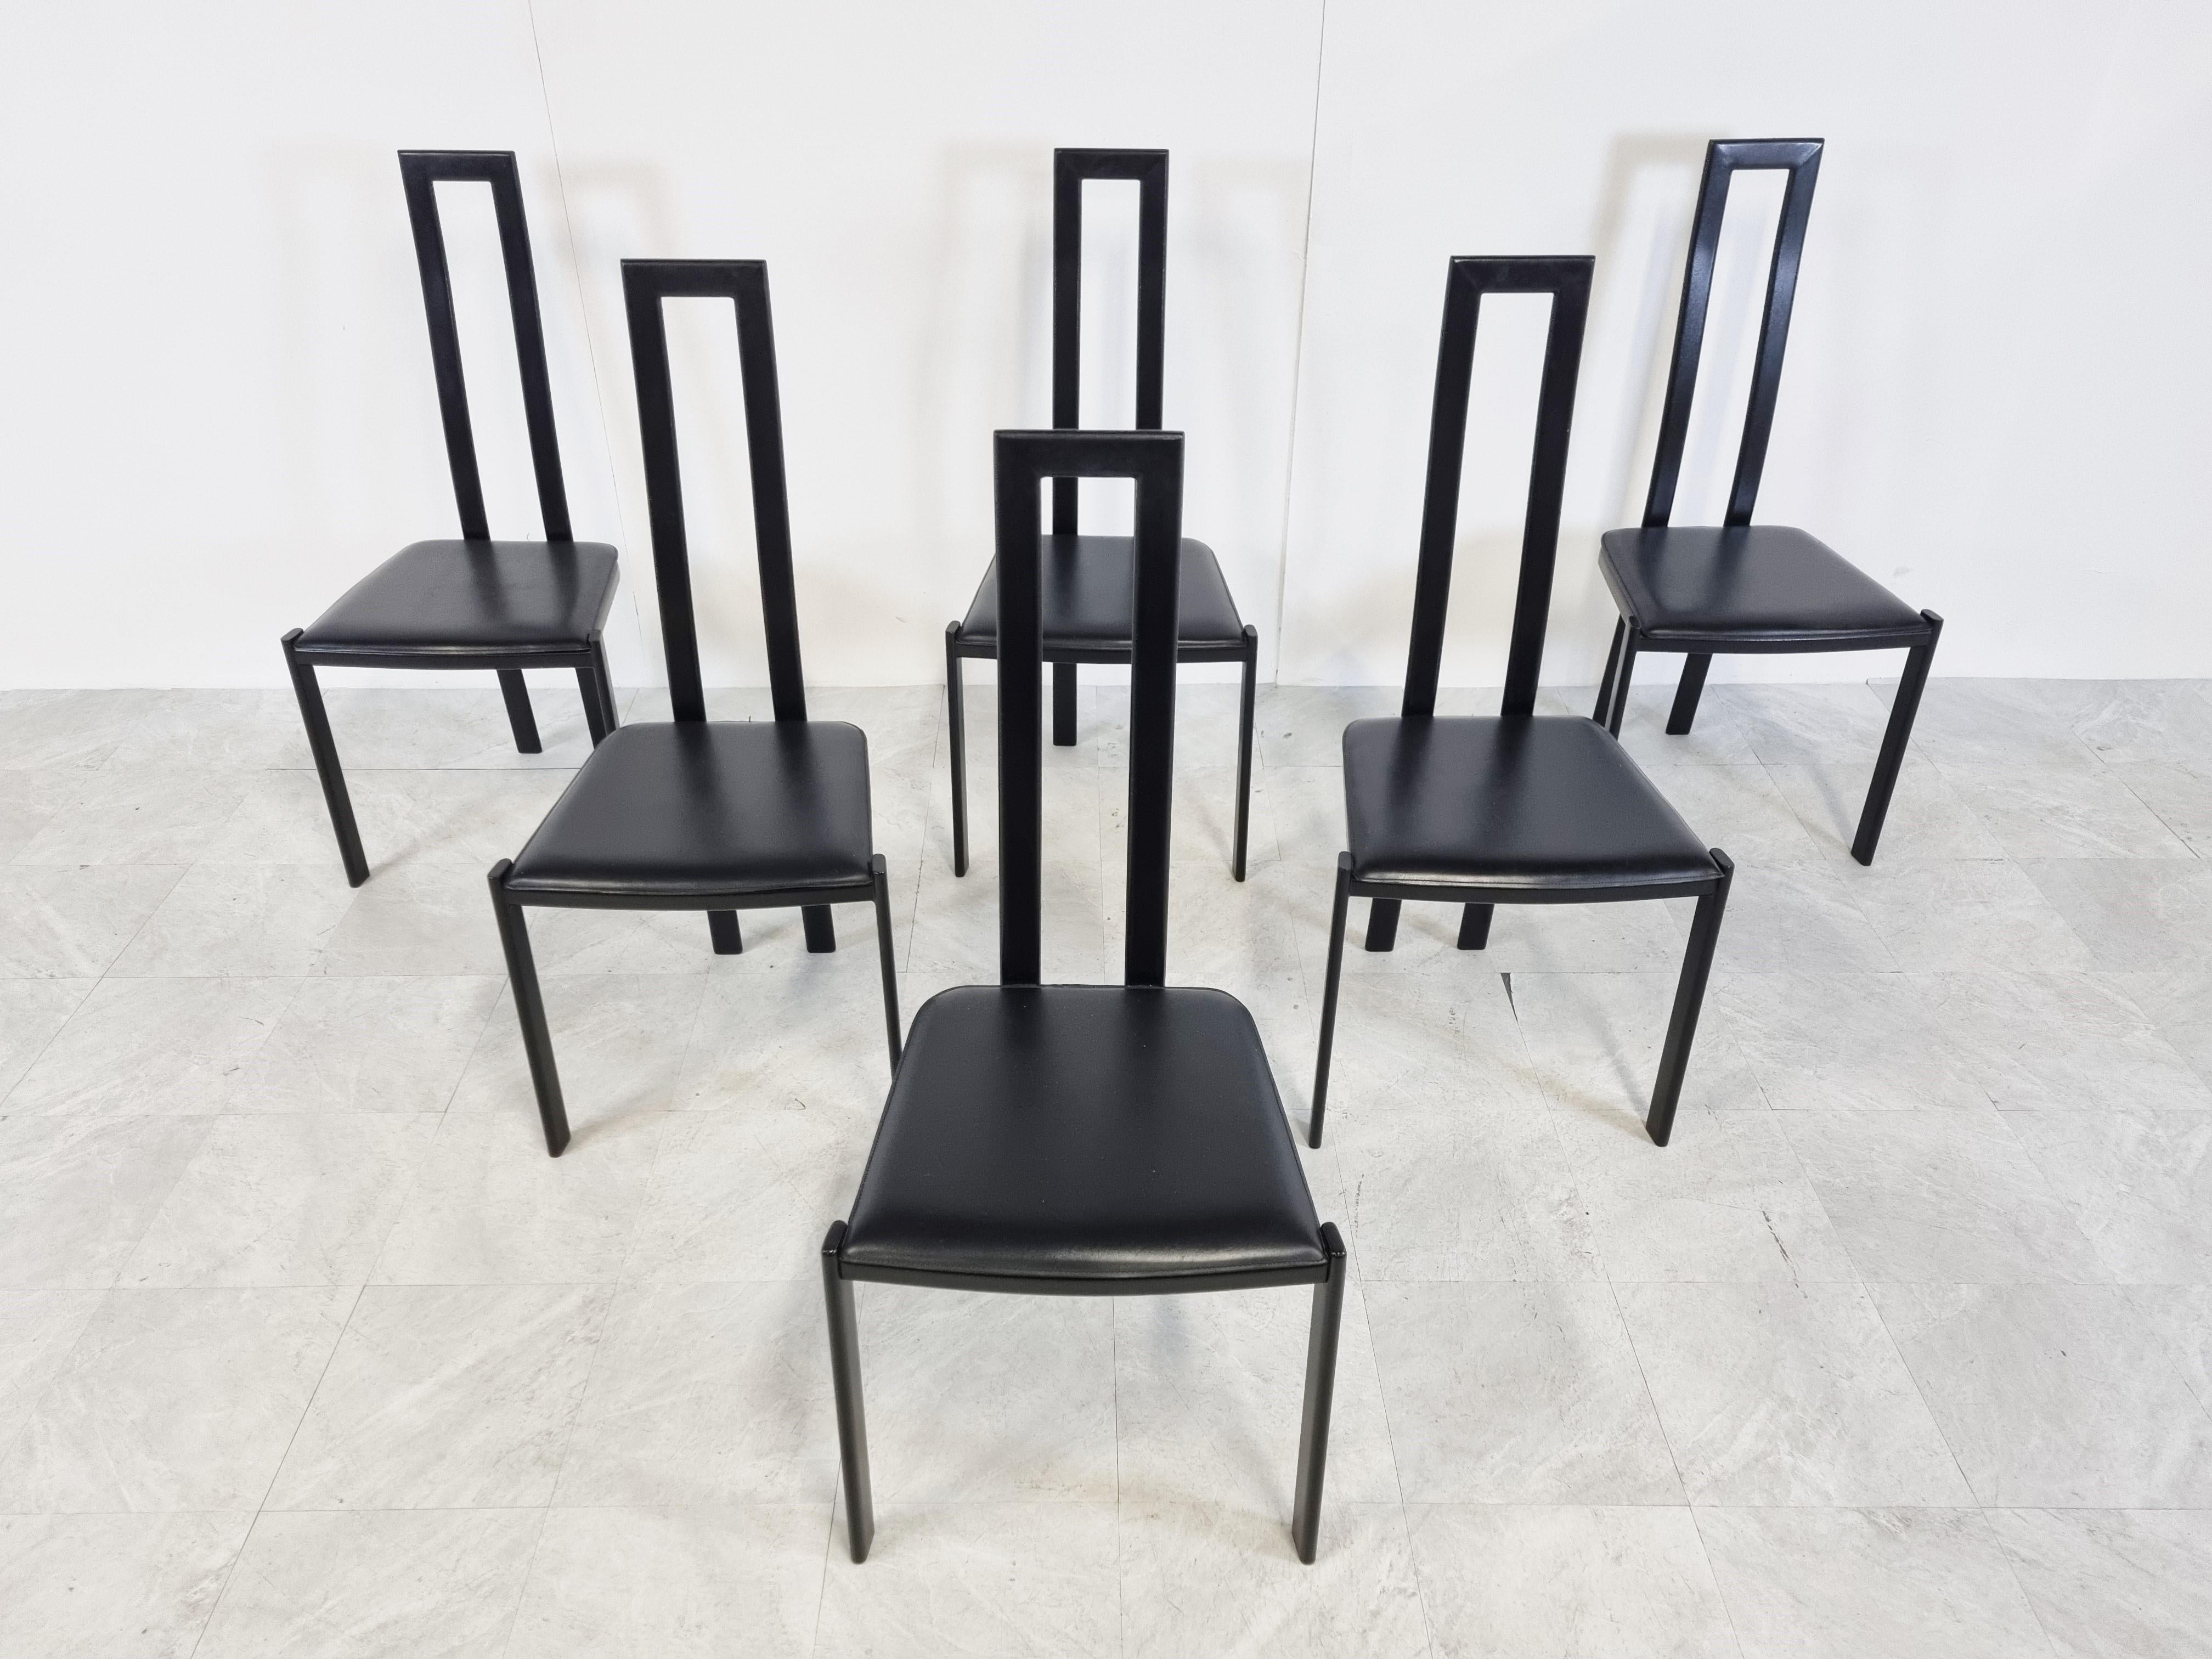 Italian Vintage Postmodern Dining Chairs, 1980s For Sale